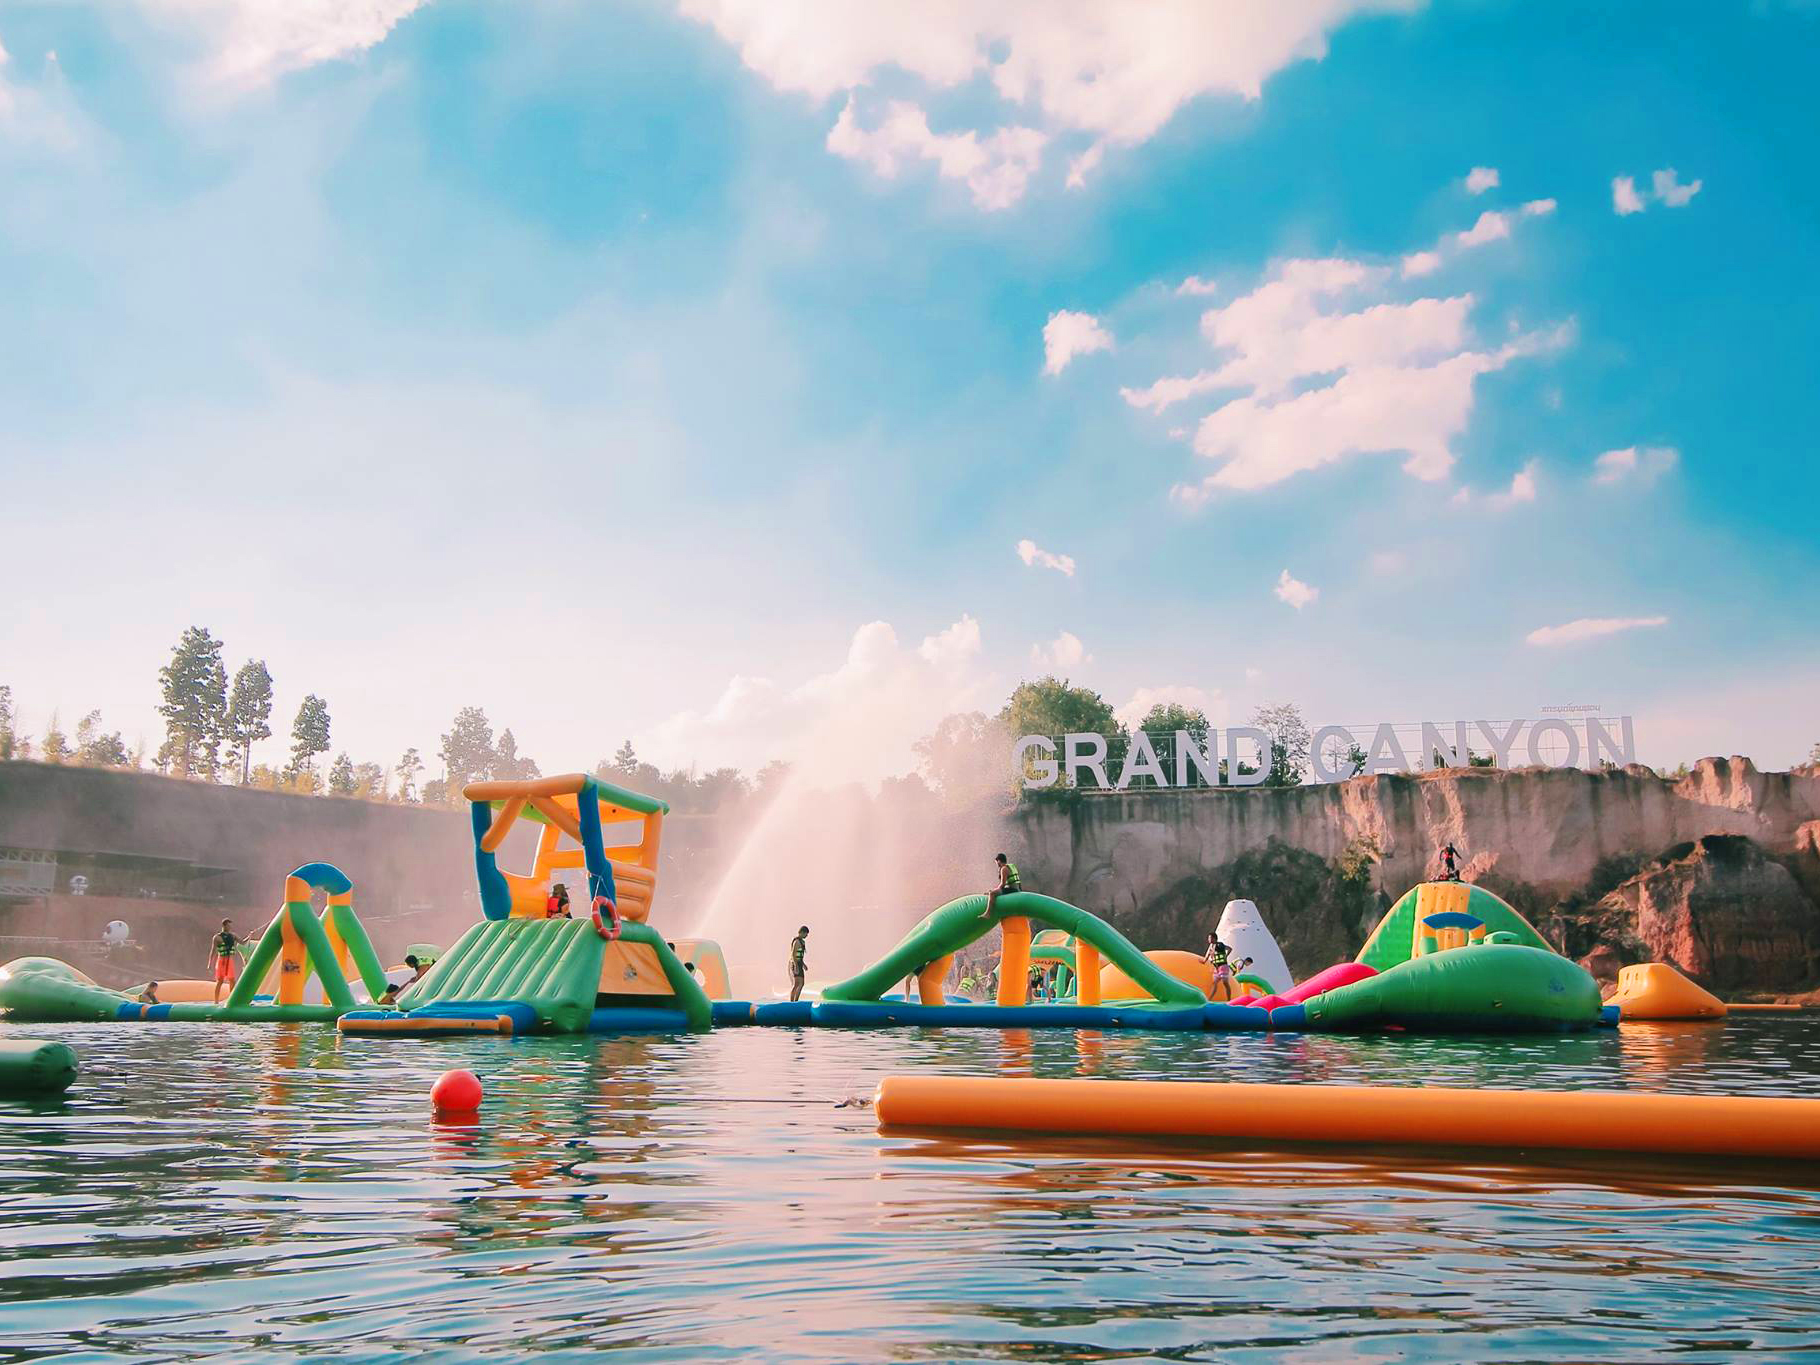 Grand Canyon Waterpark Chiang Mai - 1 Day Package